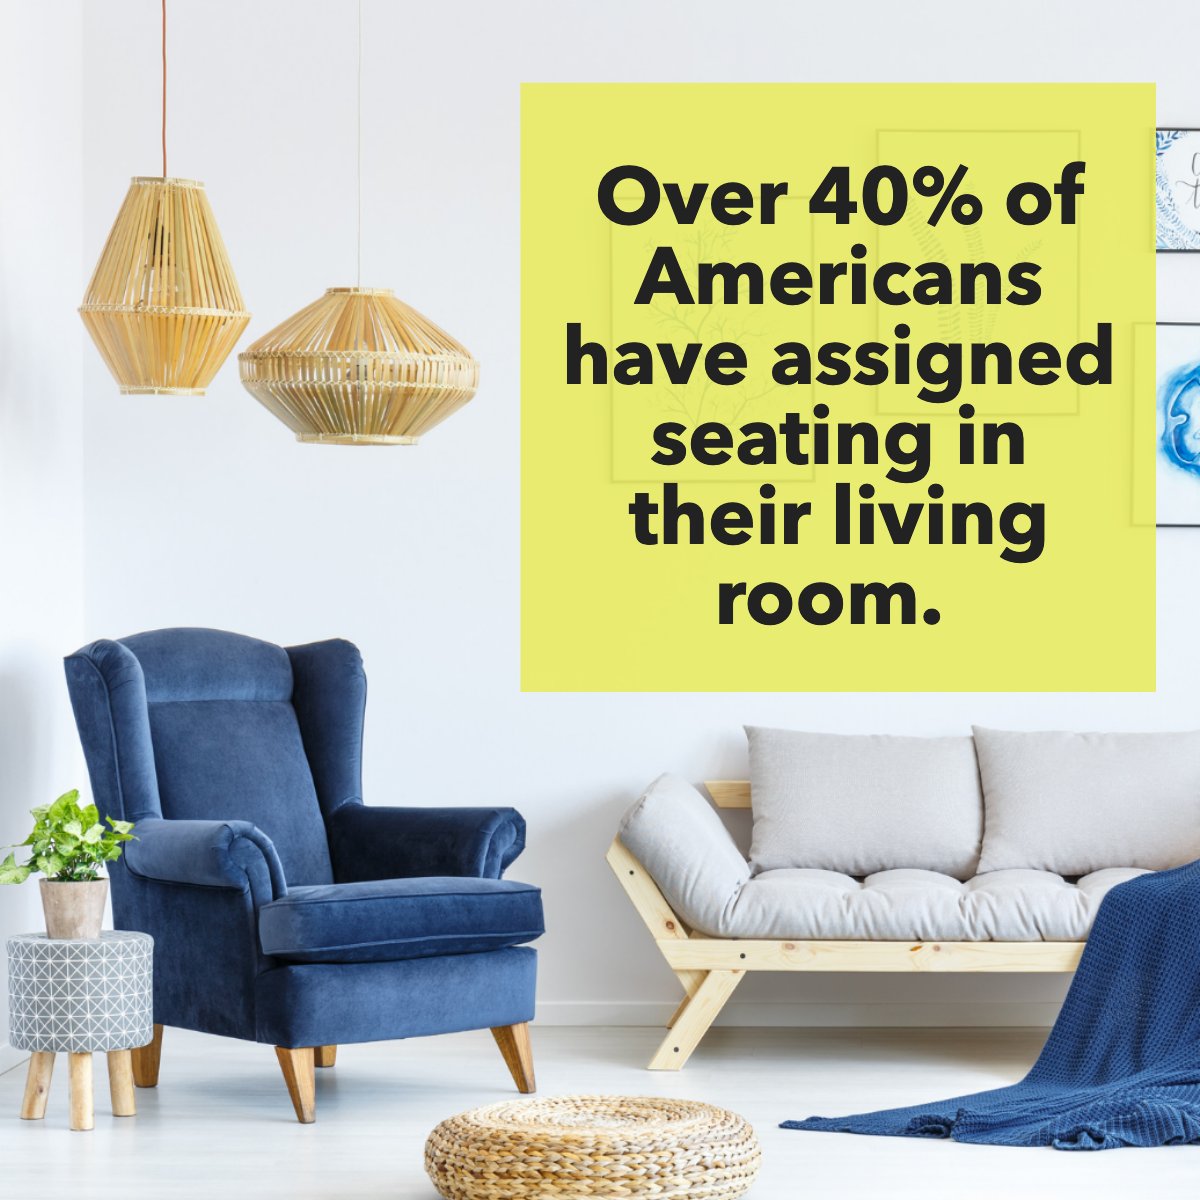 Do you have assigned seating at home? 🛋️ Let us know below! #tv #home #tvhome #favoriteshow #fact #didyounknow #RacingRealEstateAgent #BarrettRealEstate #StoneTreeRealEstateTeam #maricopaazrealestate #racingagent #arizonarealestate #phoenixrealestateagent